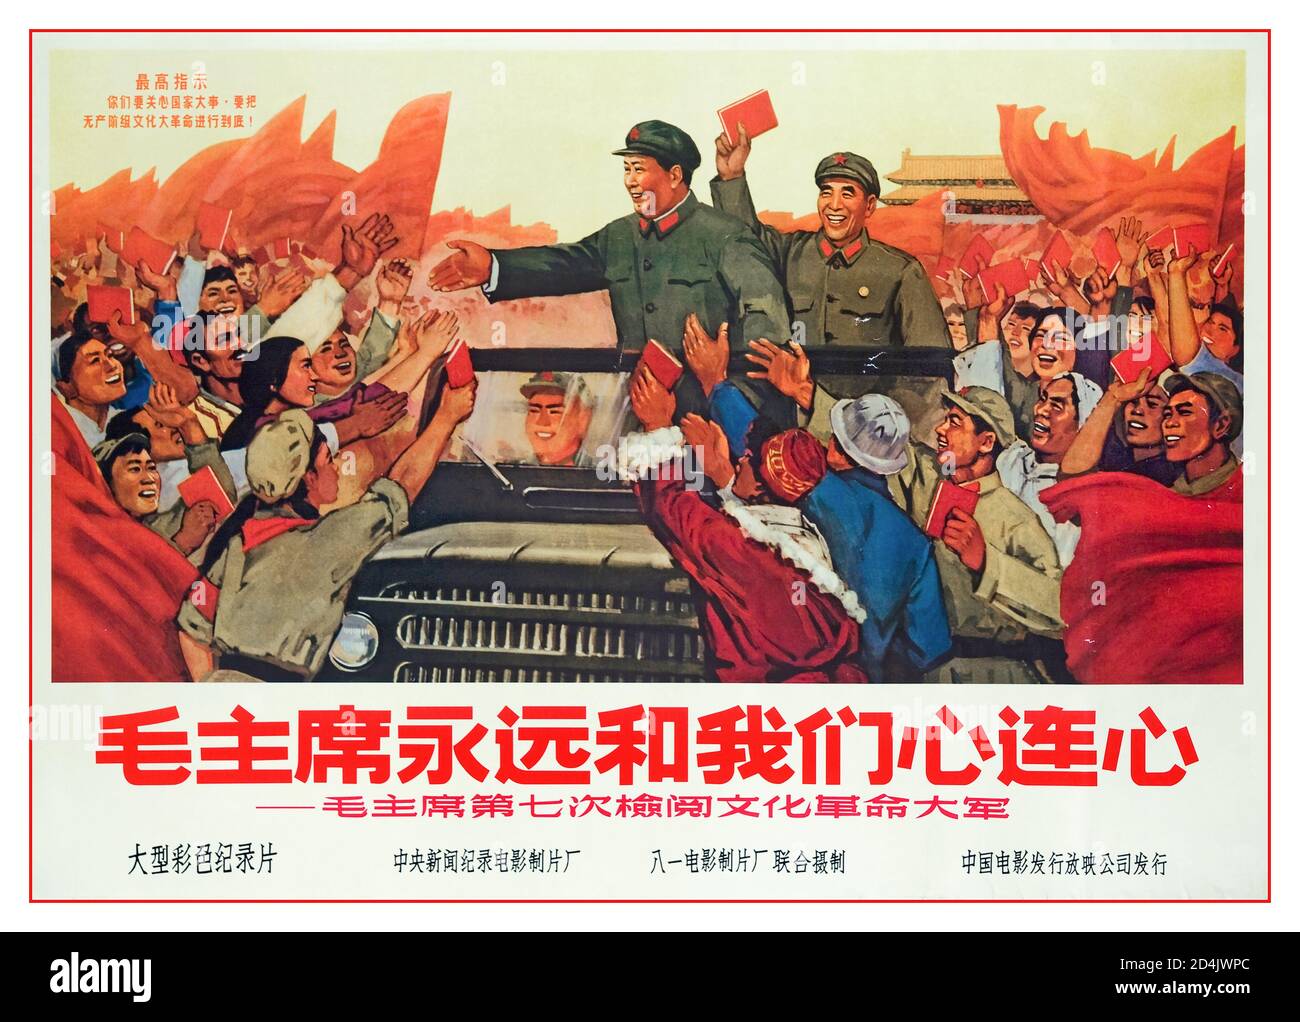 Vintage 1960's Poster Chairman Mao Zedong Chinese Cultural Revolution Poster The Cultural Revolution, formally the Great Proletarian Cultural Revolution, was a sociopolitical movement in China from 1966 until 1976. Stock Photo